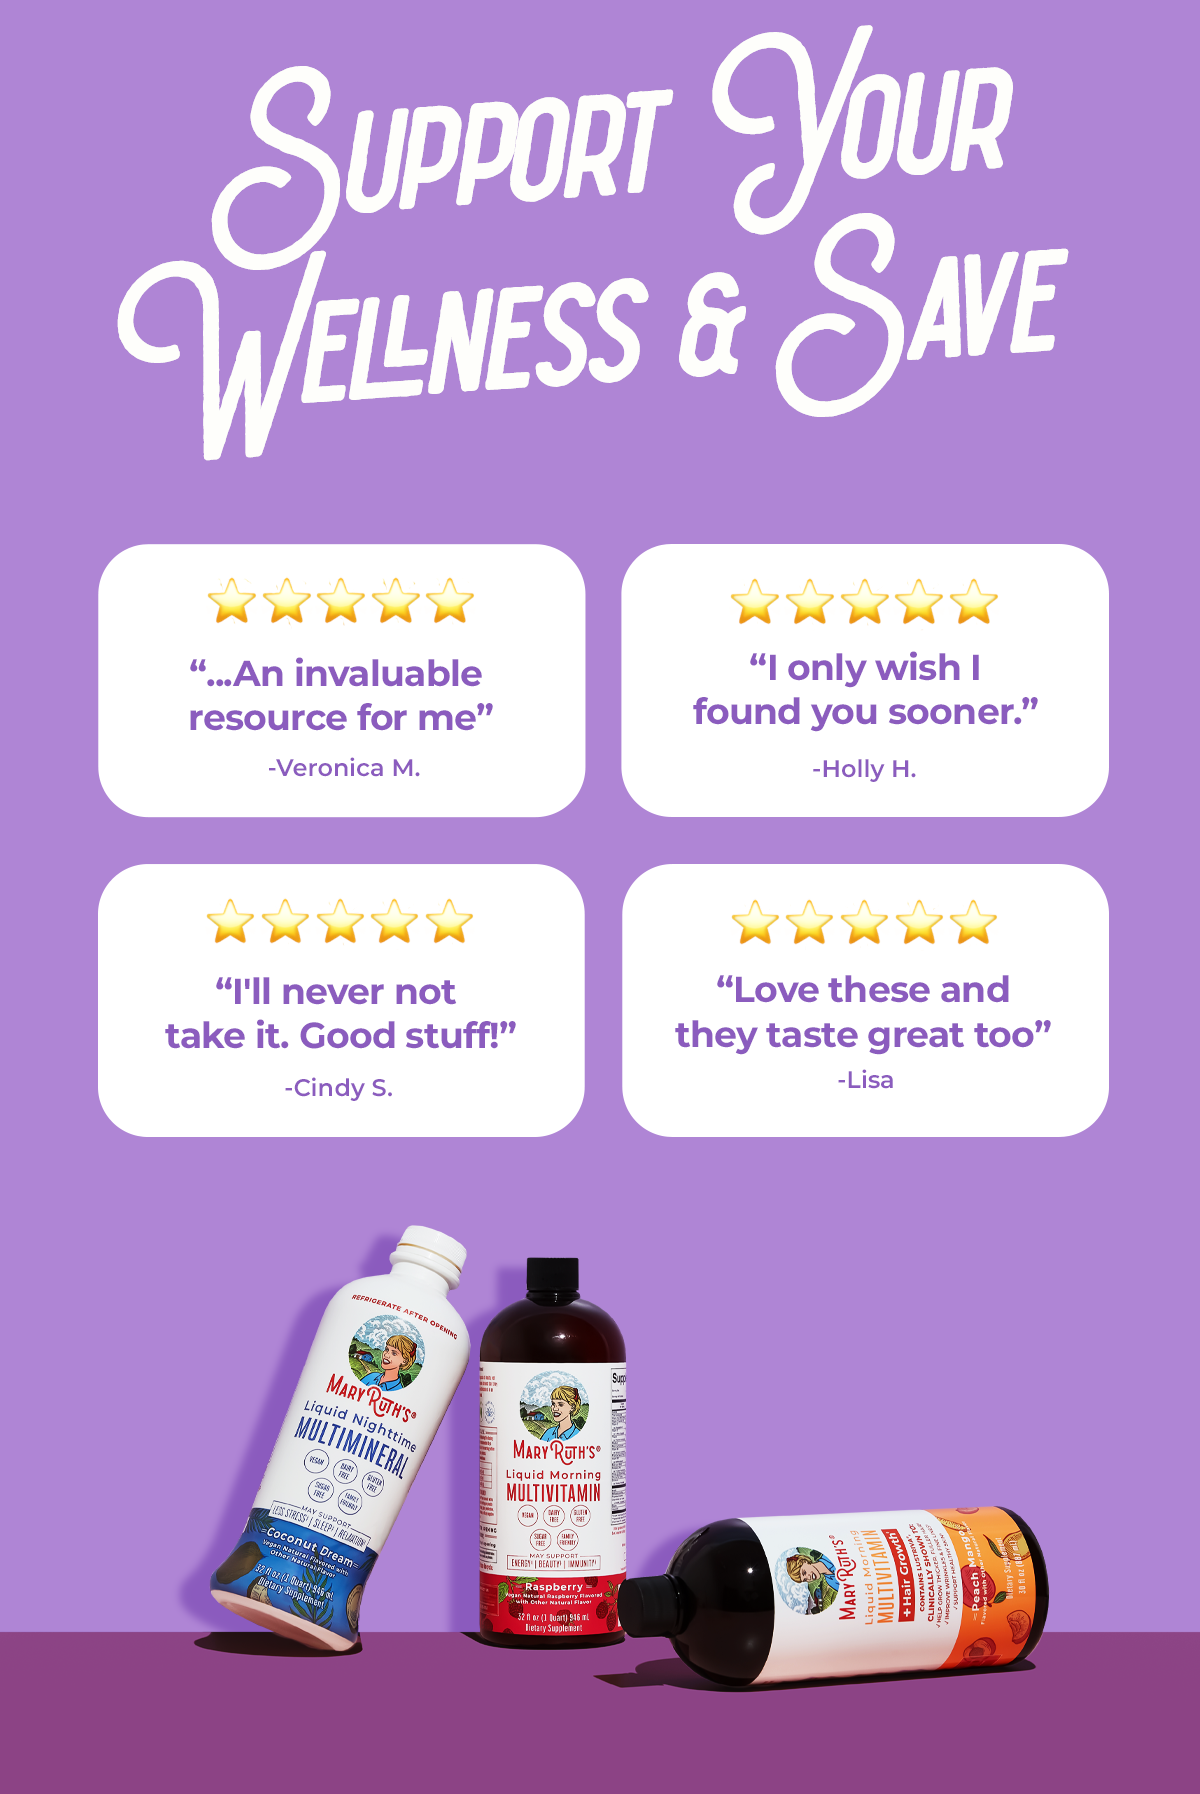 SUPPORT YOUR WELLNESS & SAVE